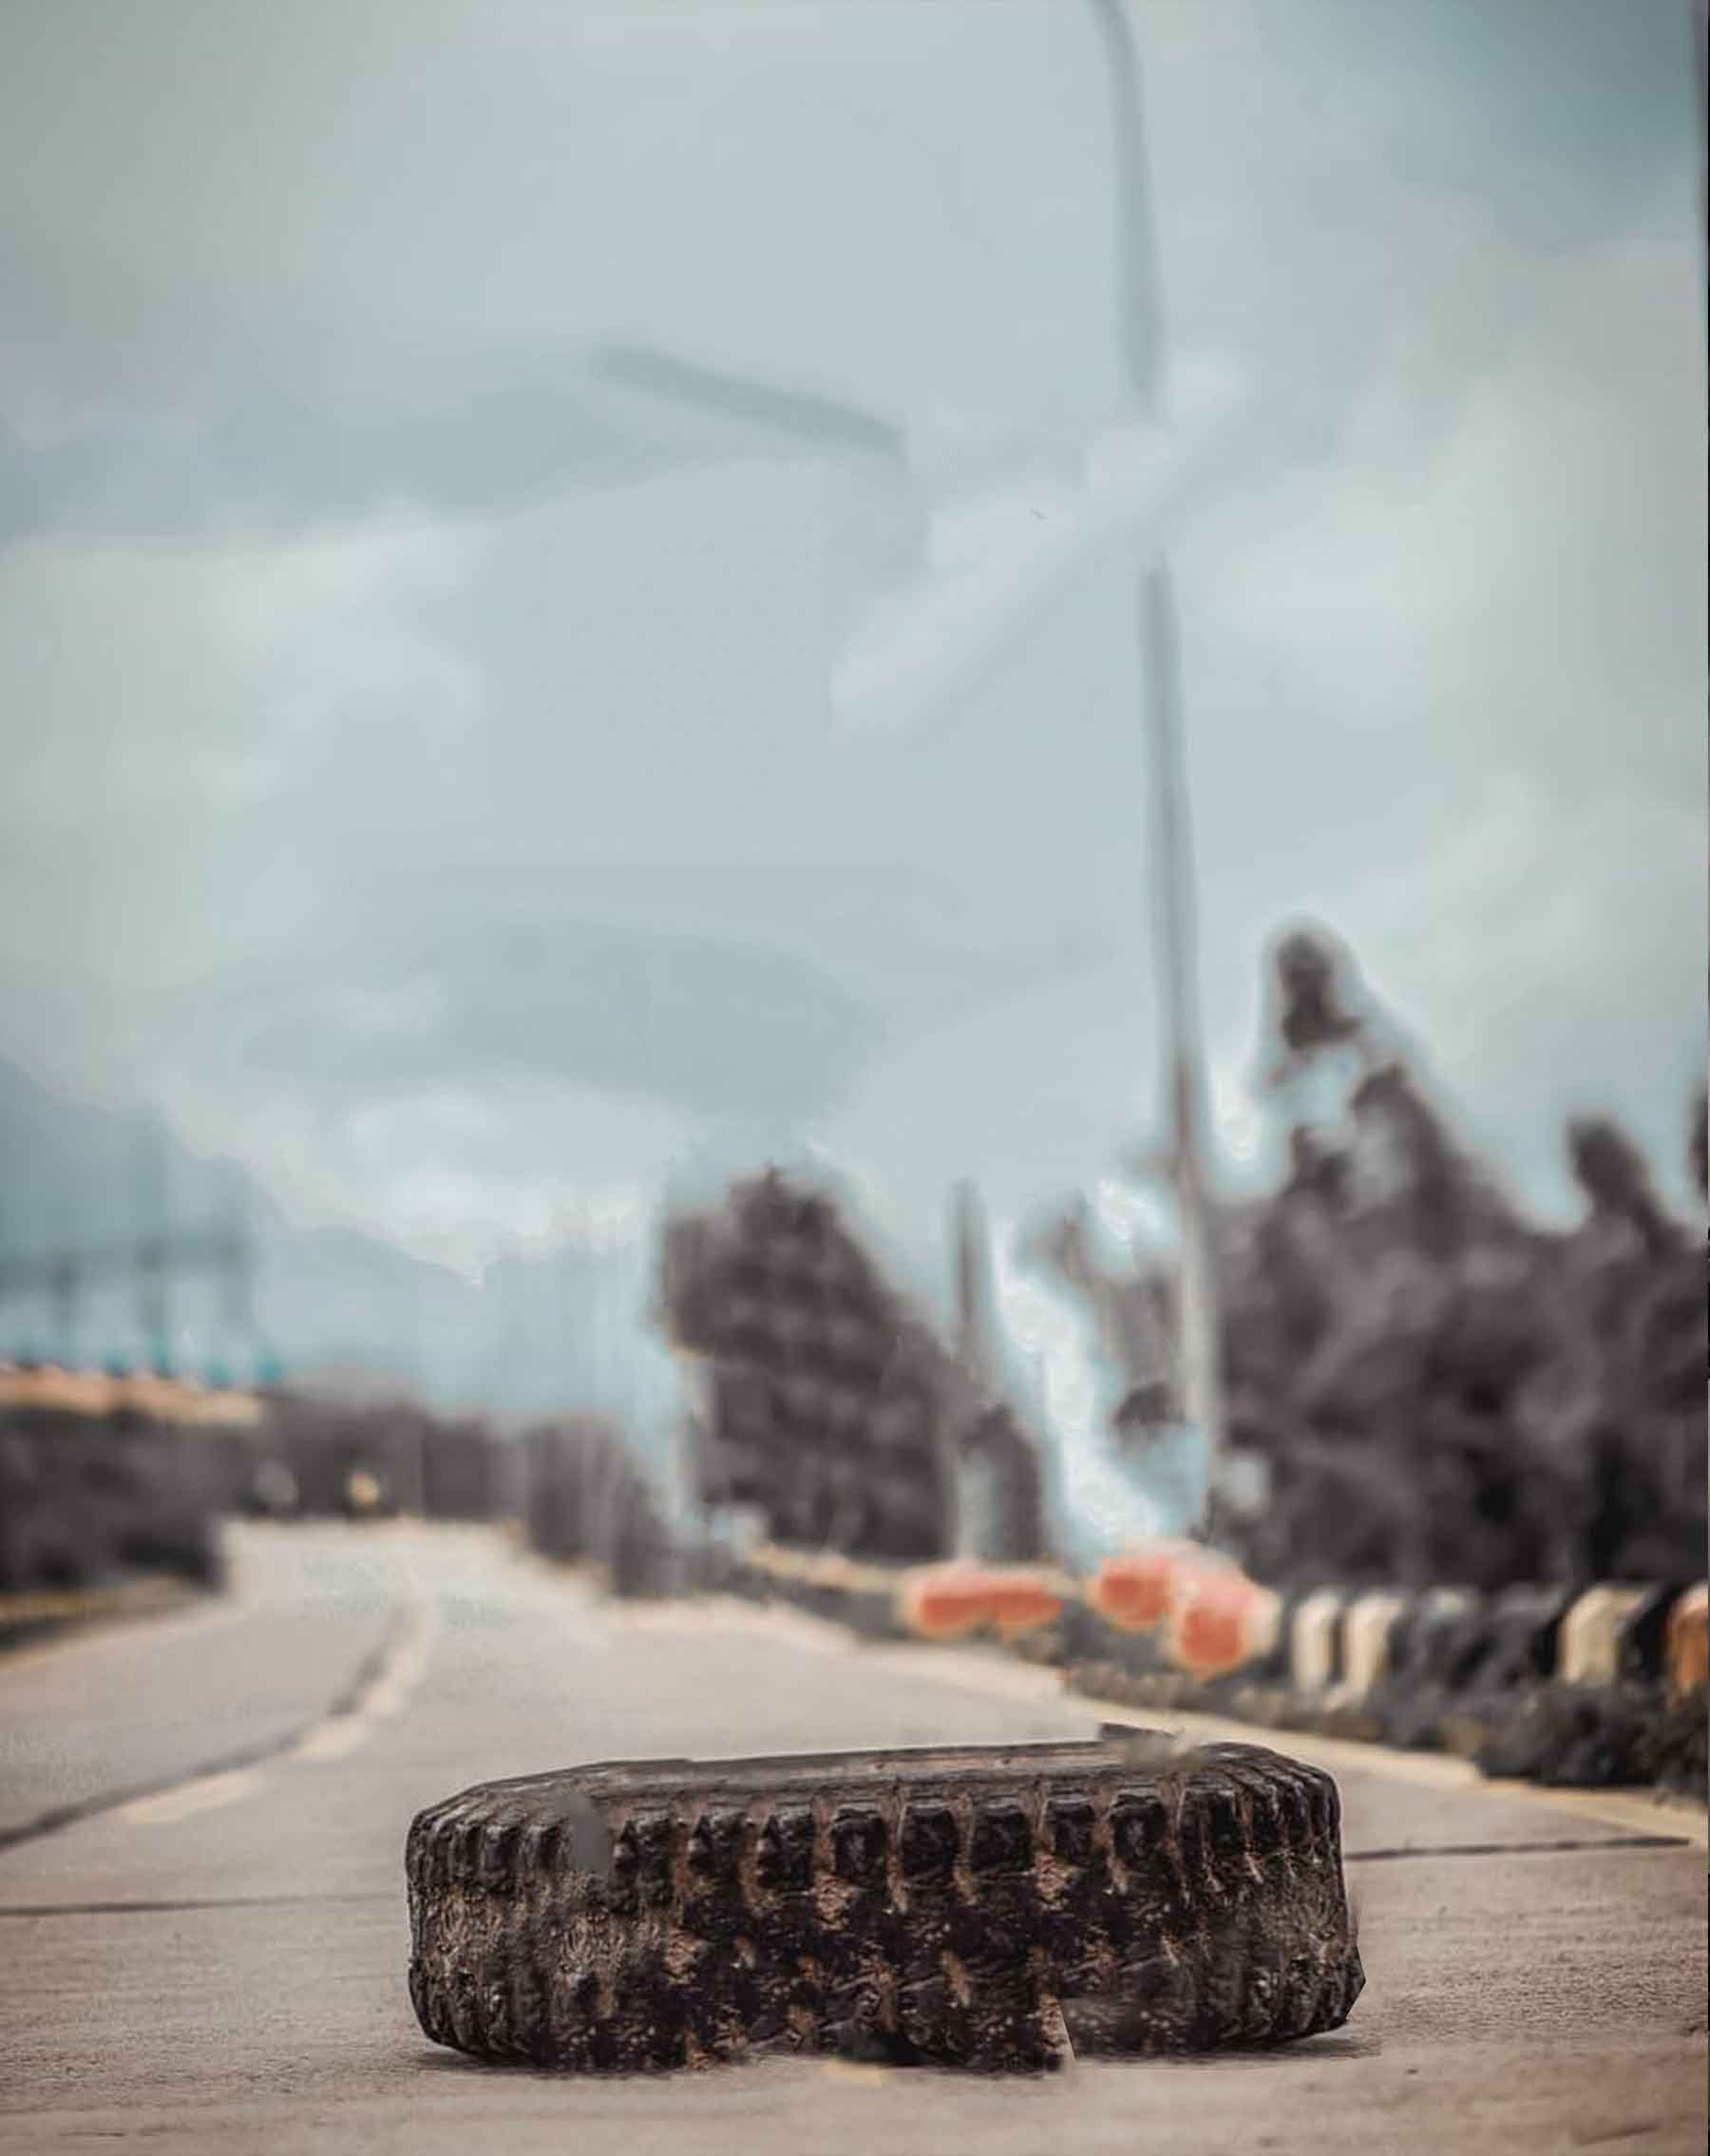 Big Tyre HD Background Free Stock Photos [ Free Download ]